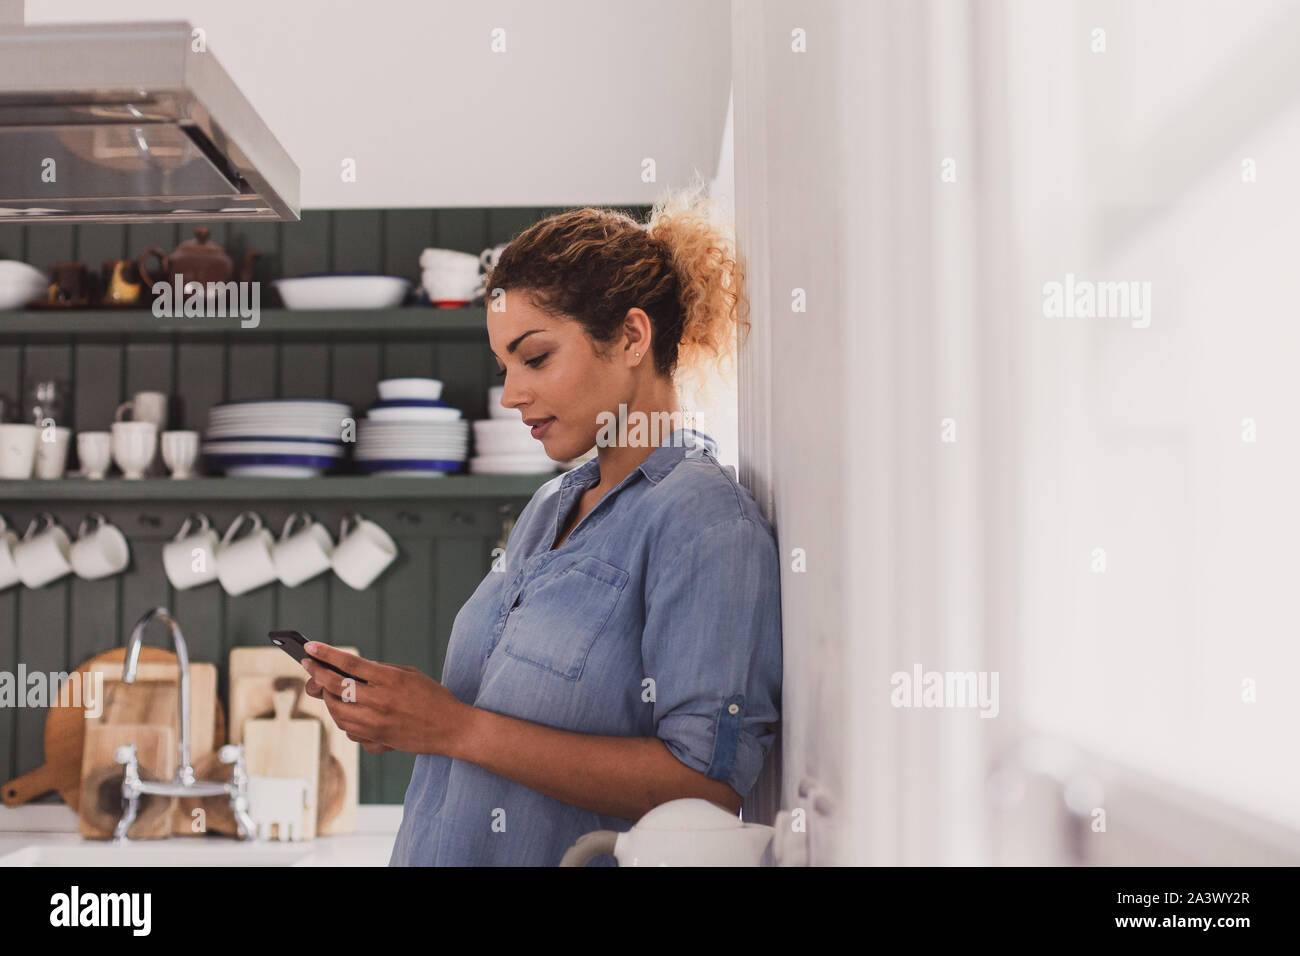 Adult female looking at smartphone in kitchen Stock Photo